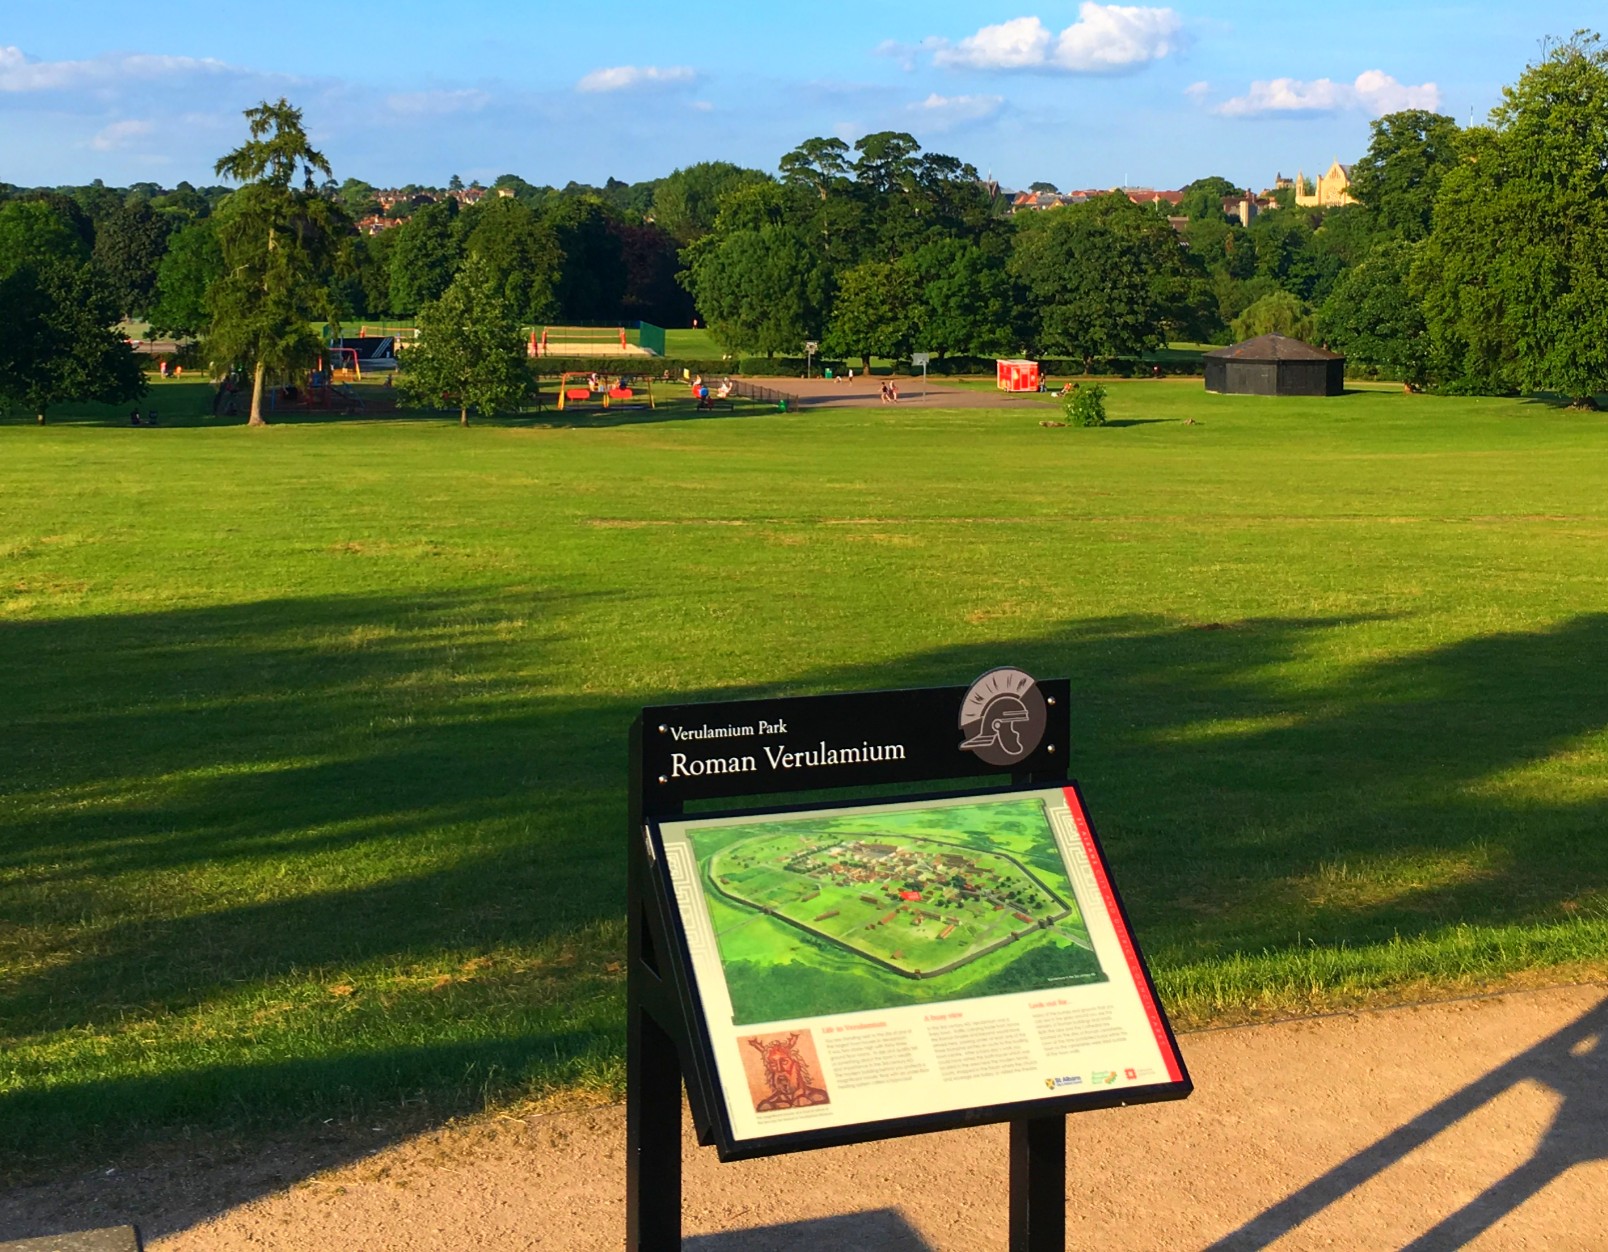 #cyclingadventures, InnTravel, slow holidays, cycling, cycle route, Verulamium Park, St Albans, Hertfordshire, scenic, views, active lifestyle, wellbeing, outdoors, get outside